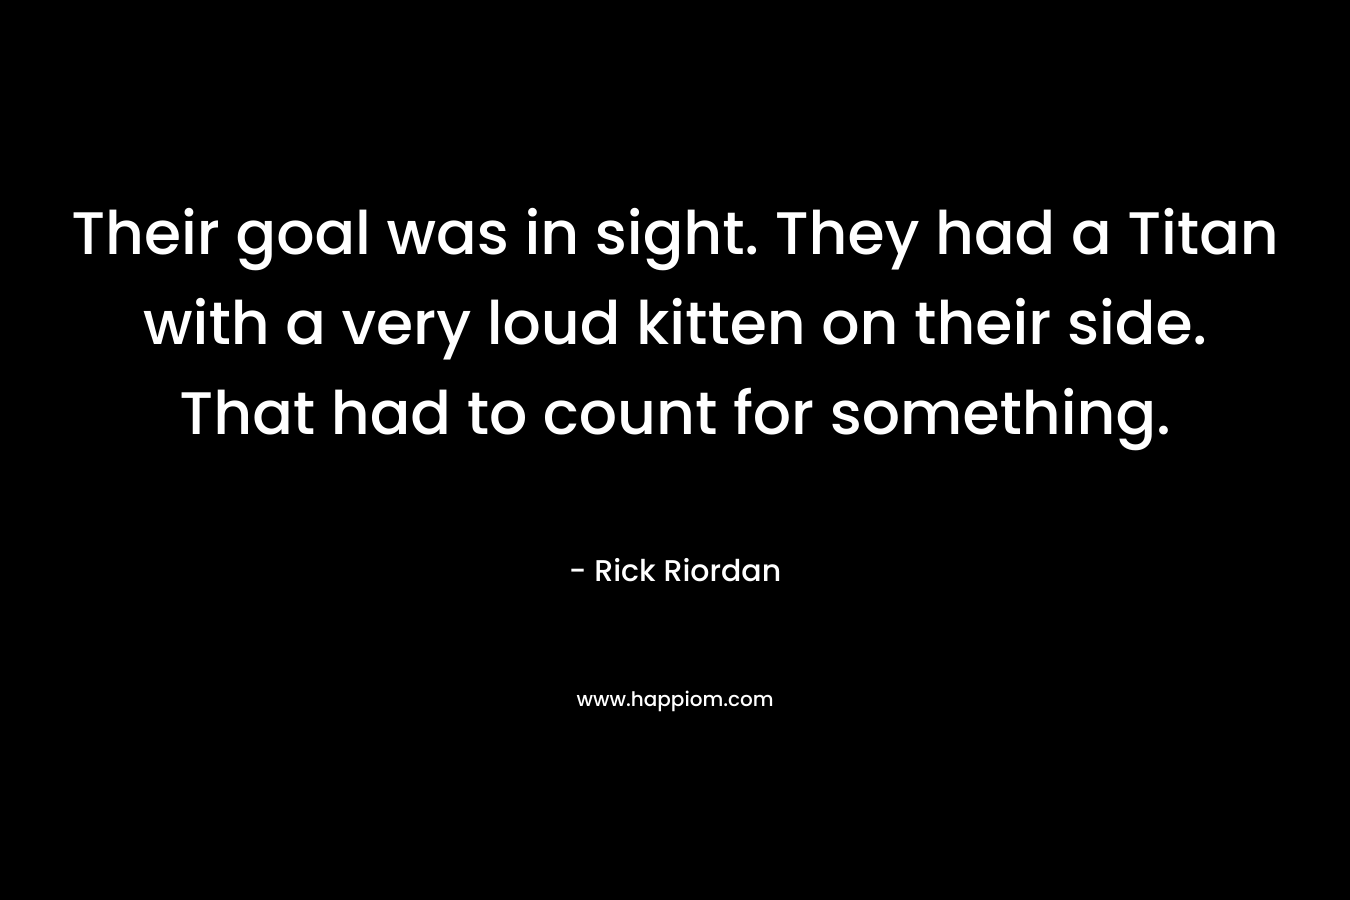 Their goal was in sight. They had a Titan with a very loud kitten on their side. That had to count for something. – Rick Riordan